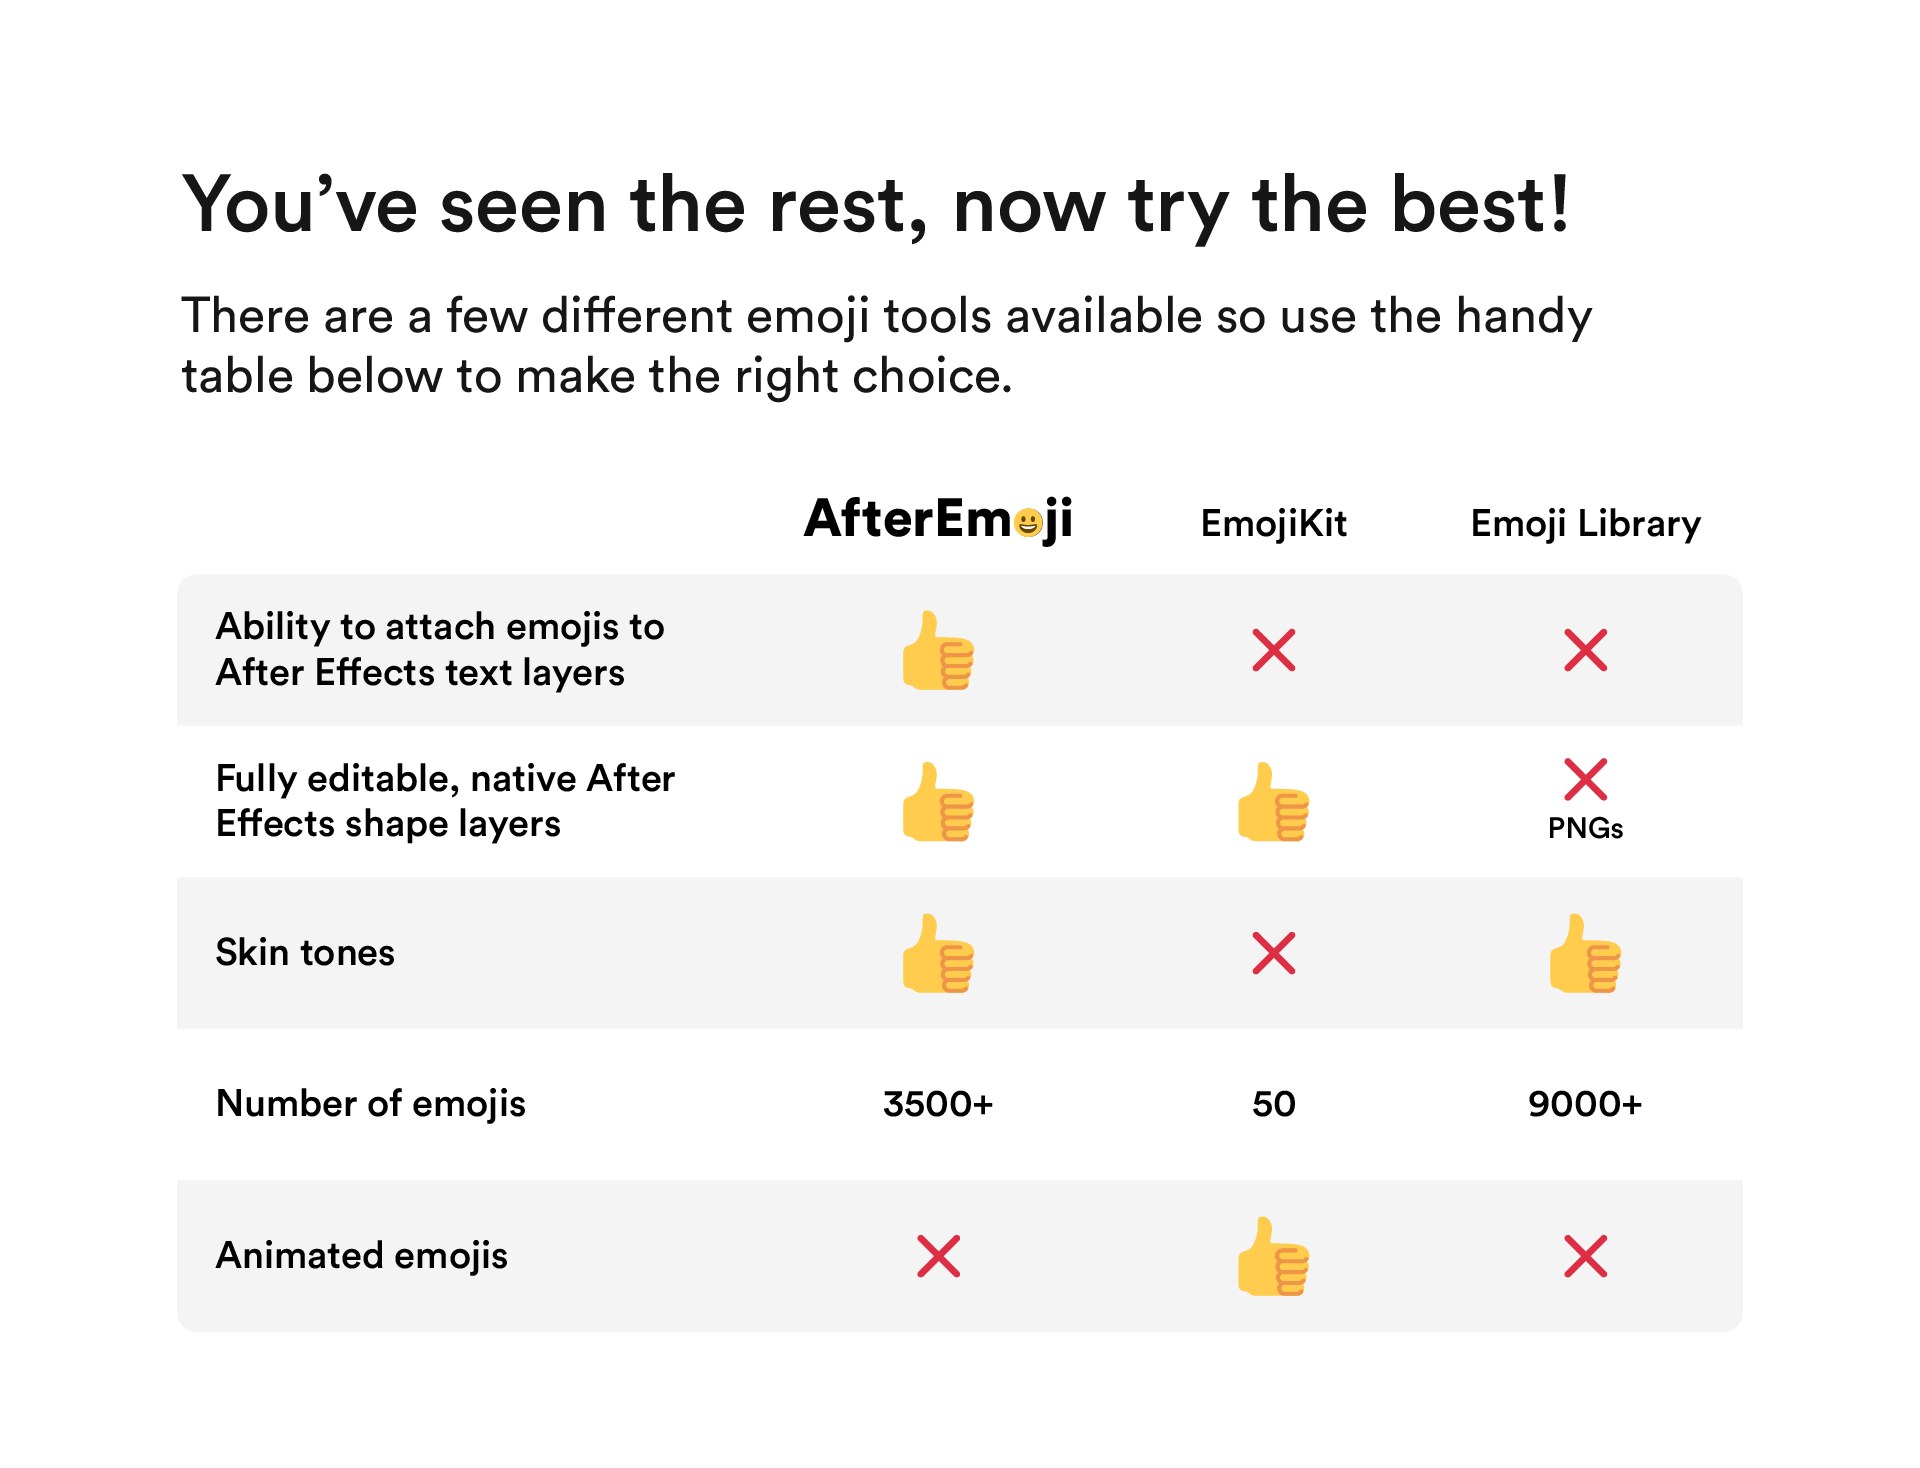 Emoji Tools Comparison Table. You've seen the rest, now try the best! There are a few different emoji tools available so use the handy table below to make the right choice.